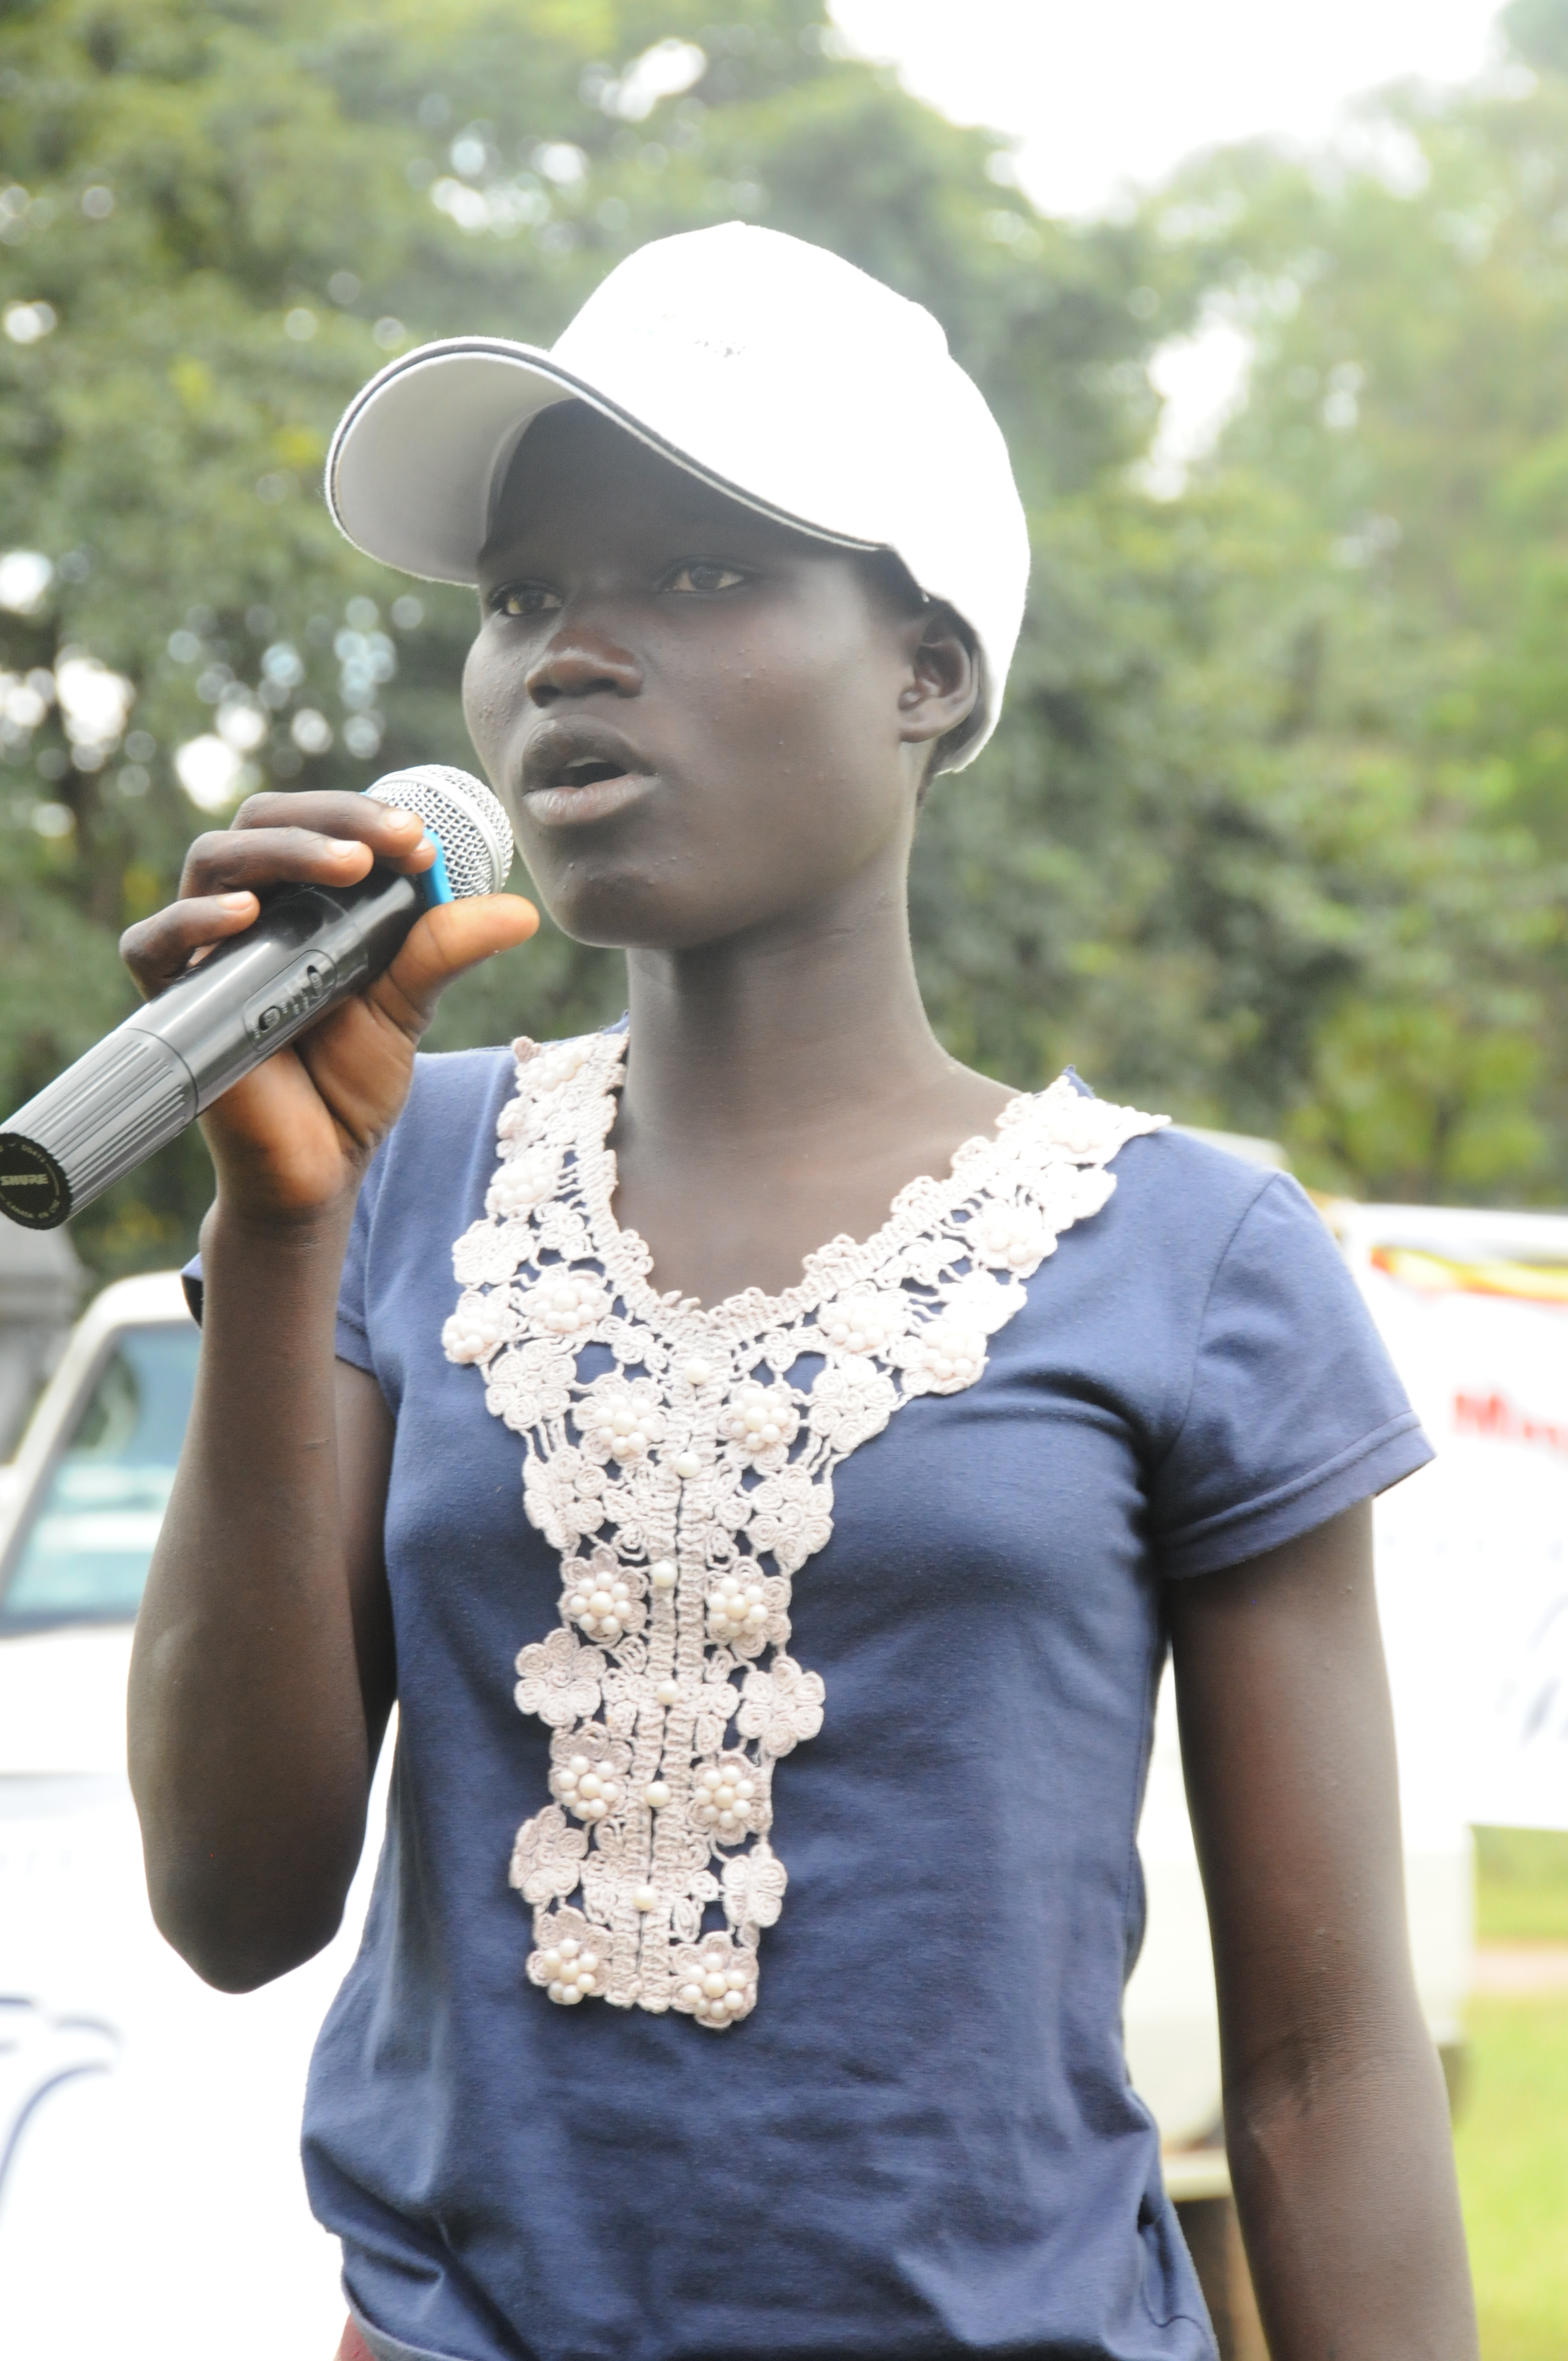 Nancy Akanyo, 14, speaks to the crowd after receiving the 200 million and first treatment of Mectizan to prevent river blindness.